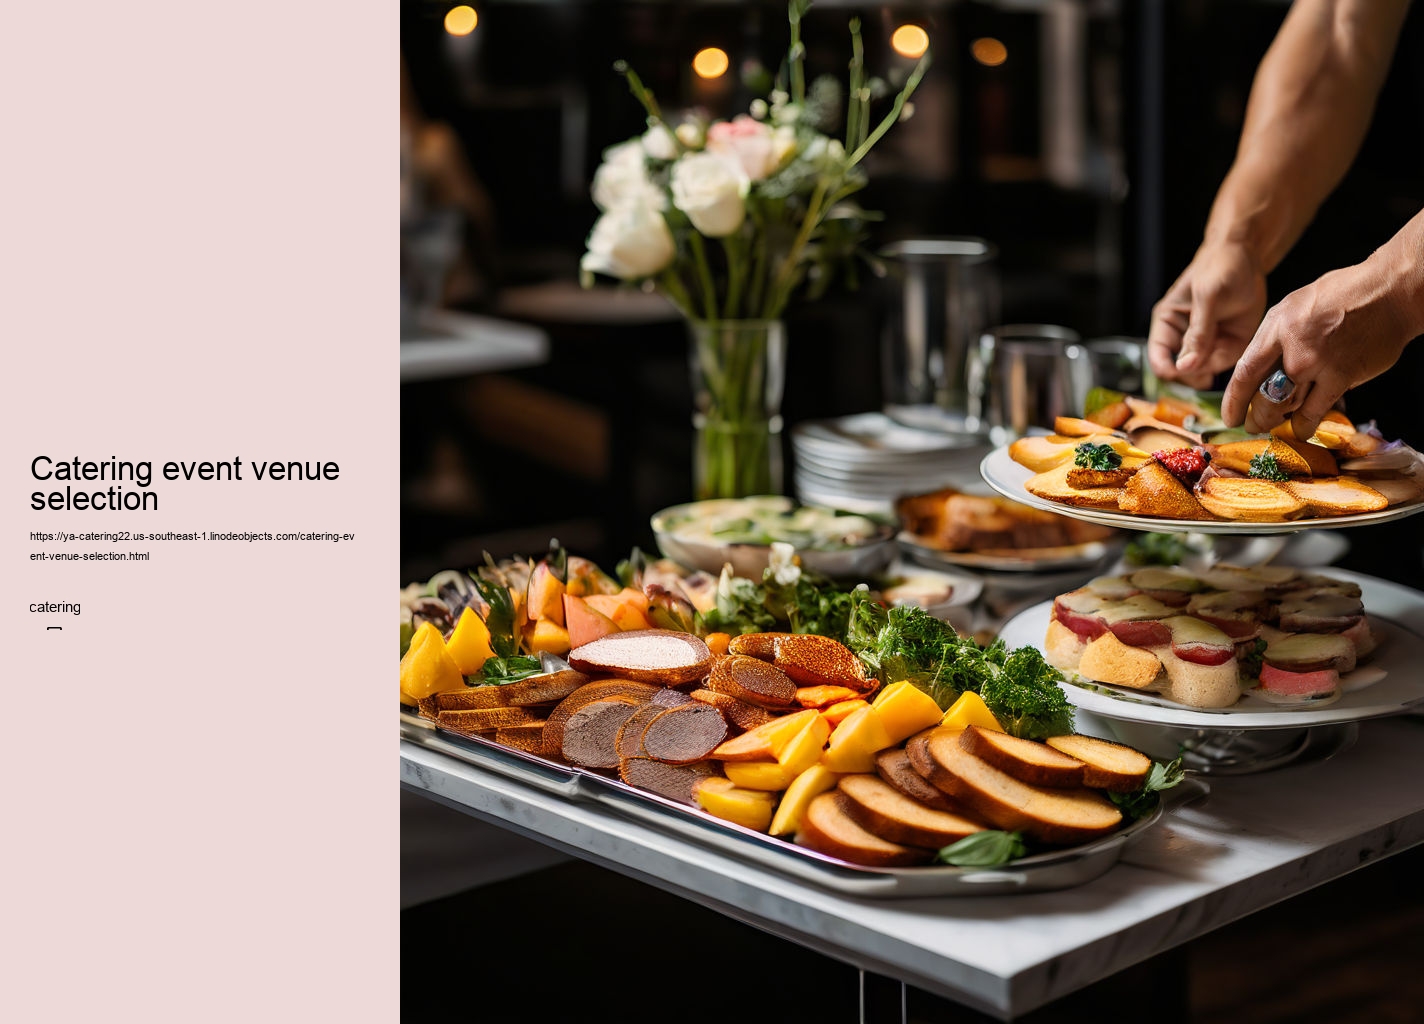 Catering event venue selection